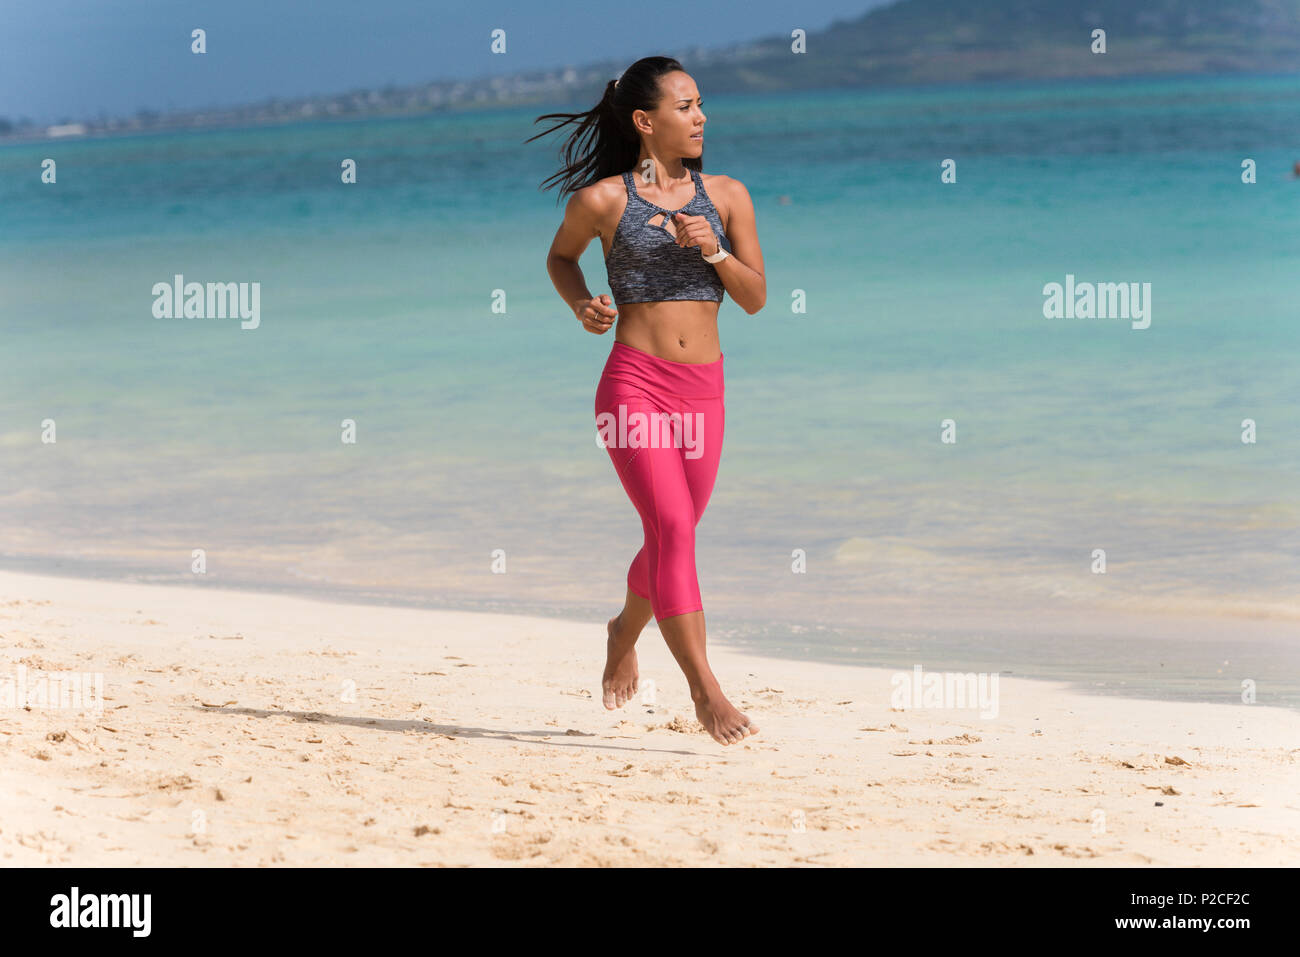 Woman jogging in the beach Stock Photo